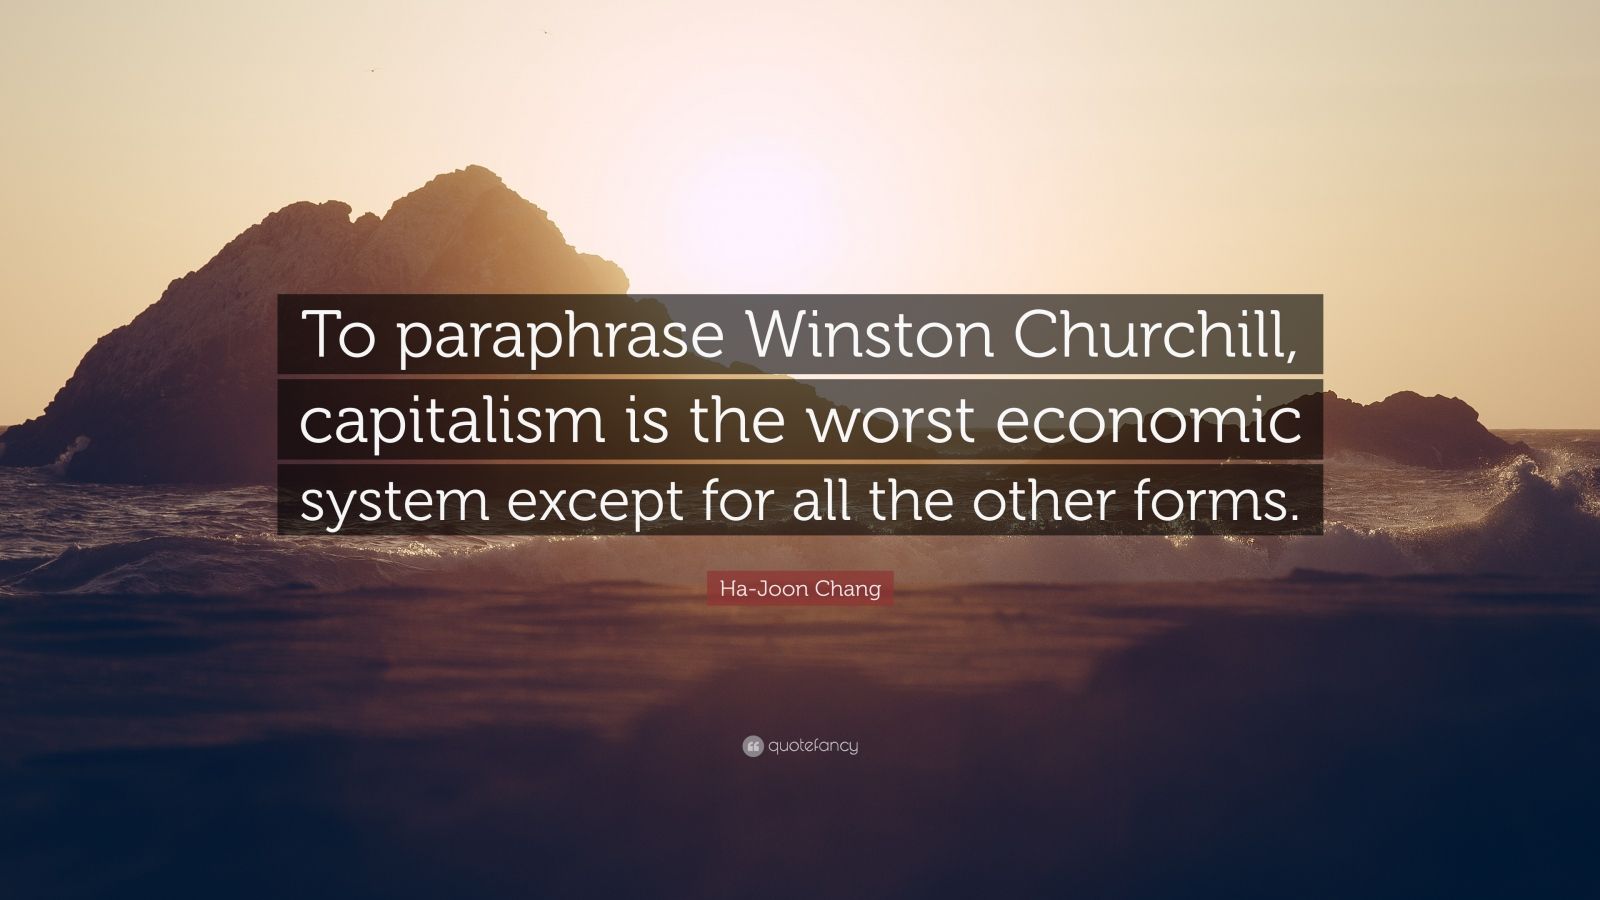 Ha-Joon Chang Quote: “To paraphrase Winston Churchill, capitalism is